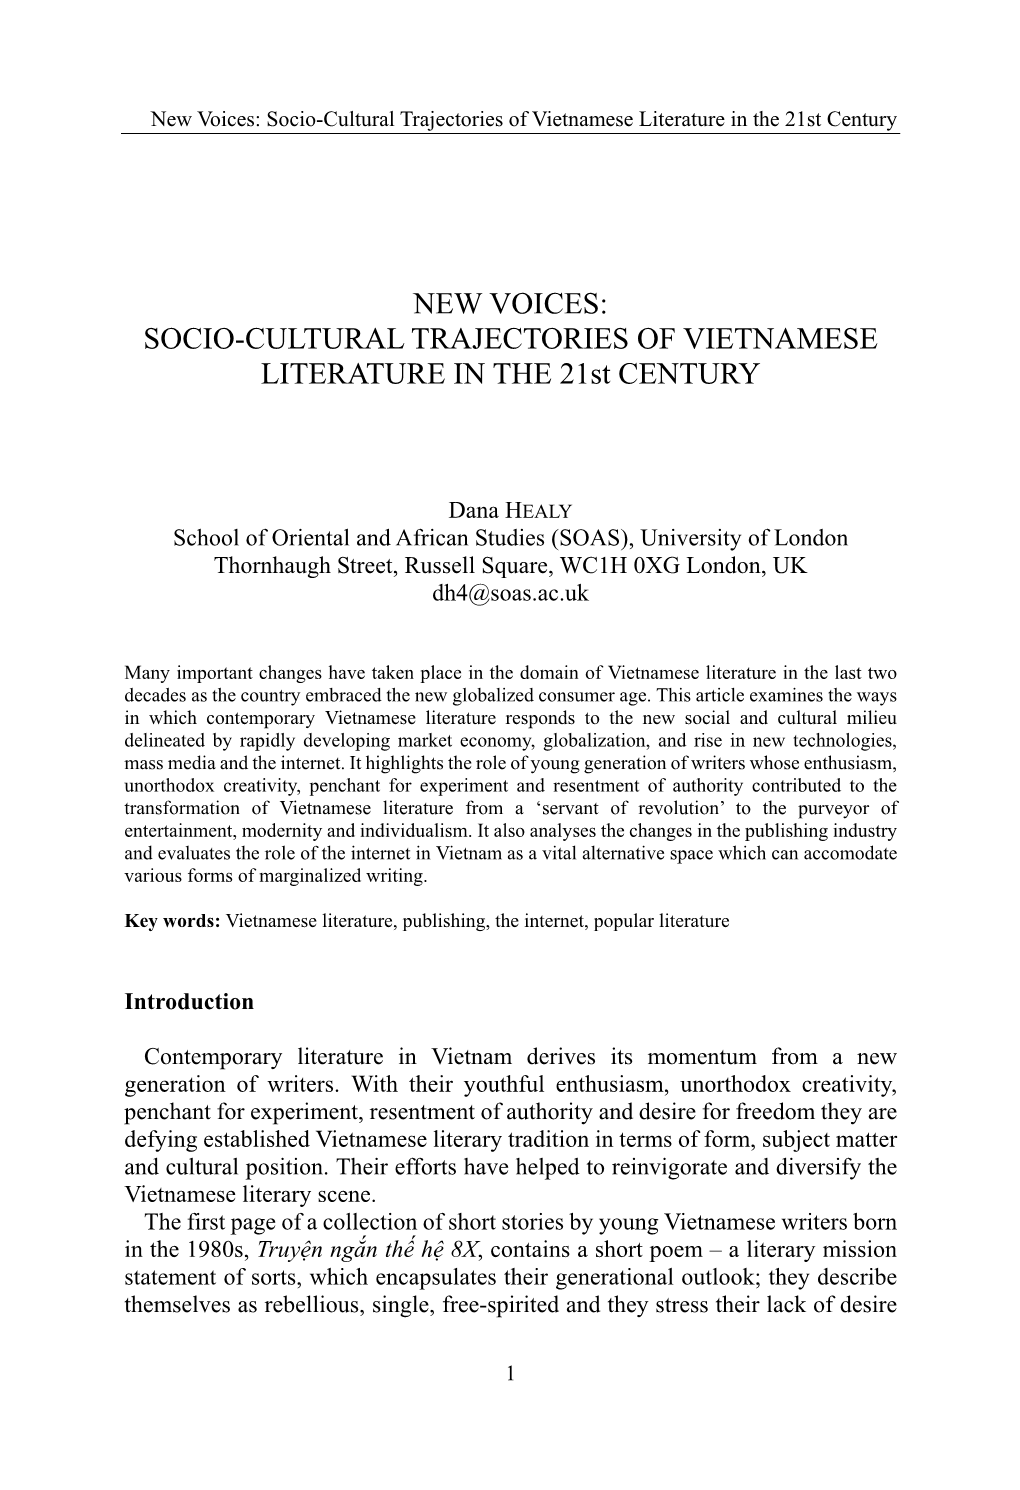 New Voices: Socio-Cultural Trajectories of Vietnamese Literature in the 21St Century